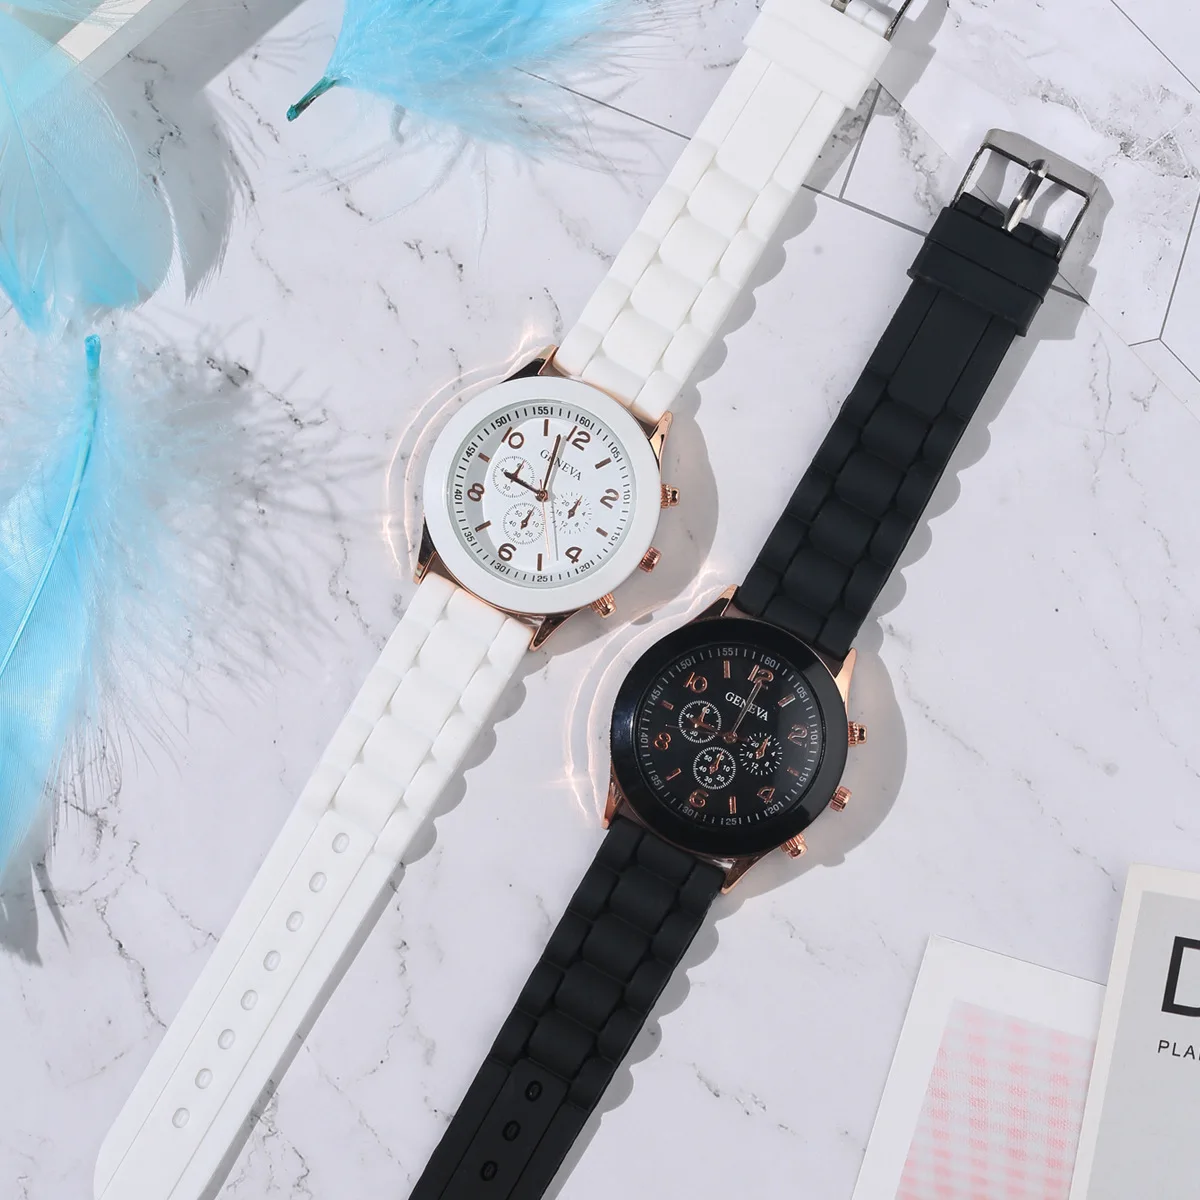 Wholesale Fashion Jelly Macaron Watch Sports Wrist Quartz Watch Glass Lovely Design Colorful Silicone Student Children Gift Kids